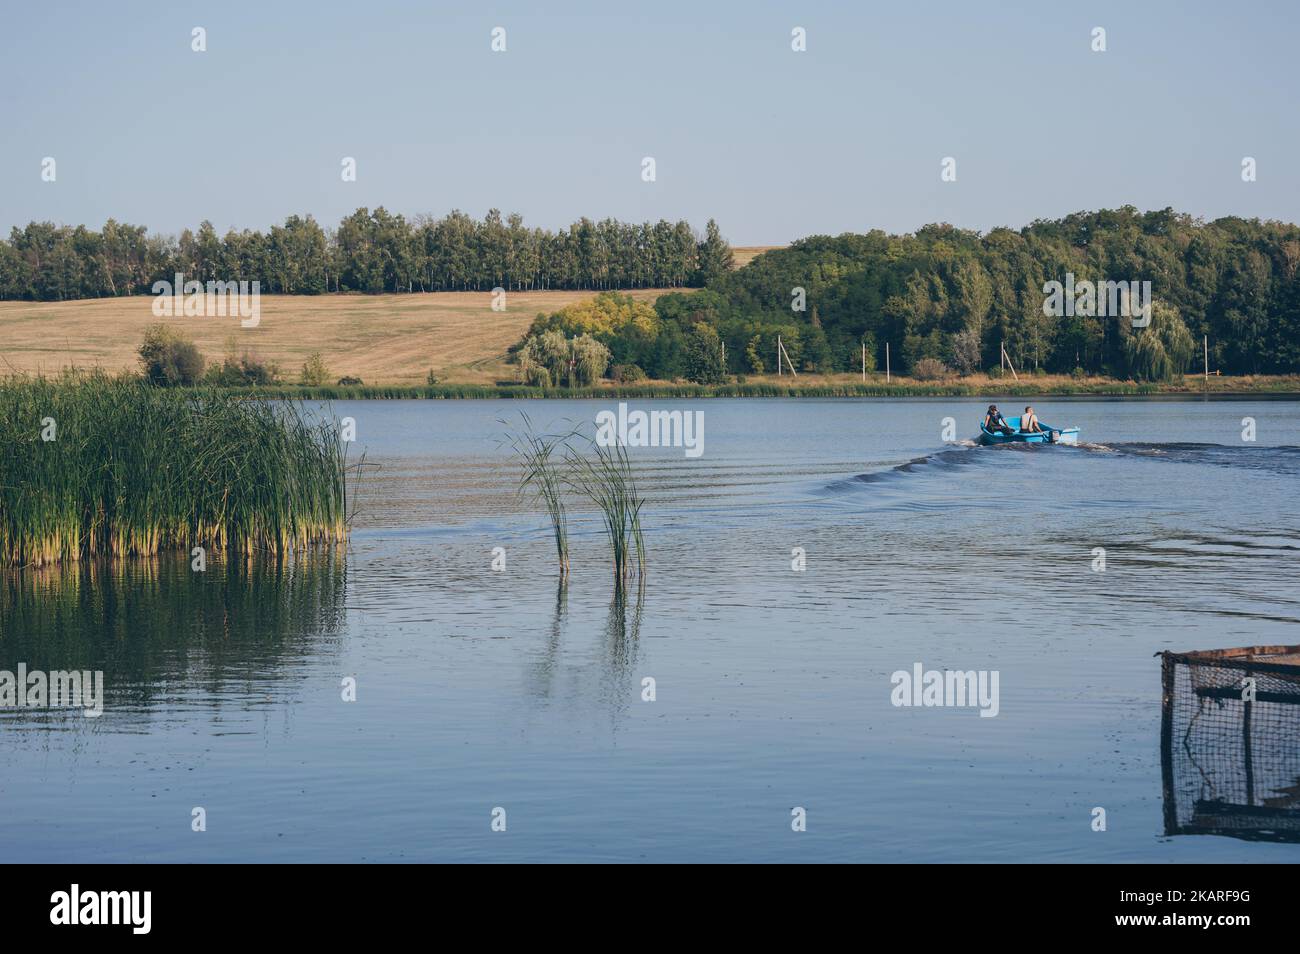 Two fyshemen in motor boat sails dissecting waves on river again Stock Photo